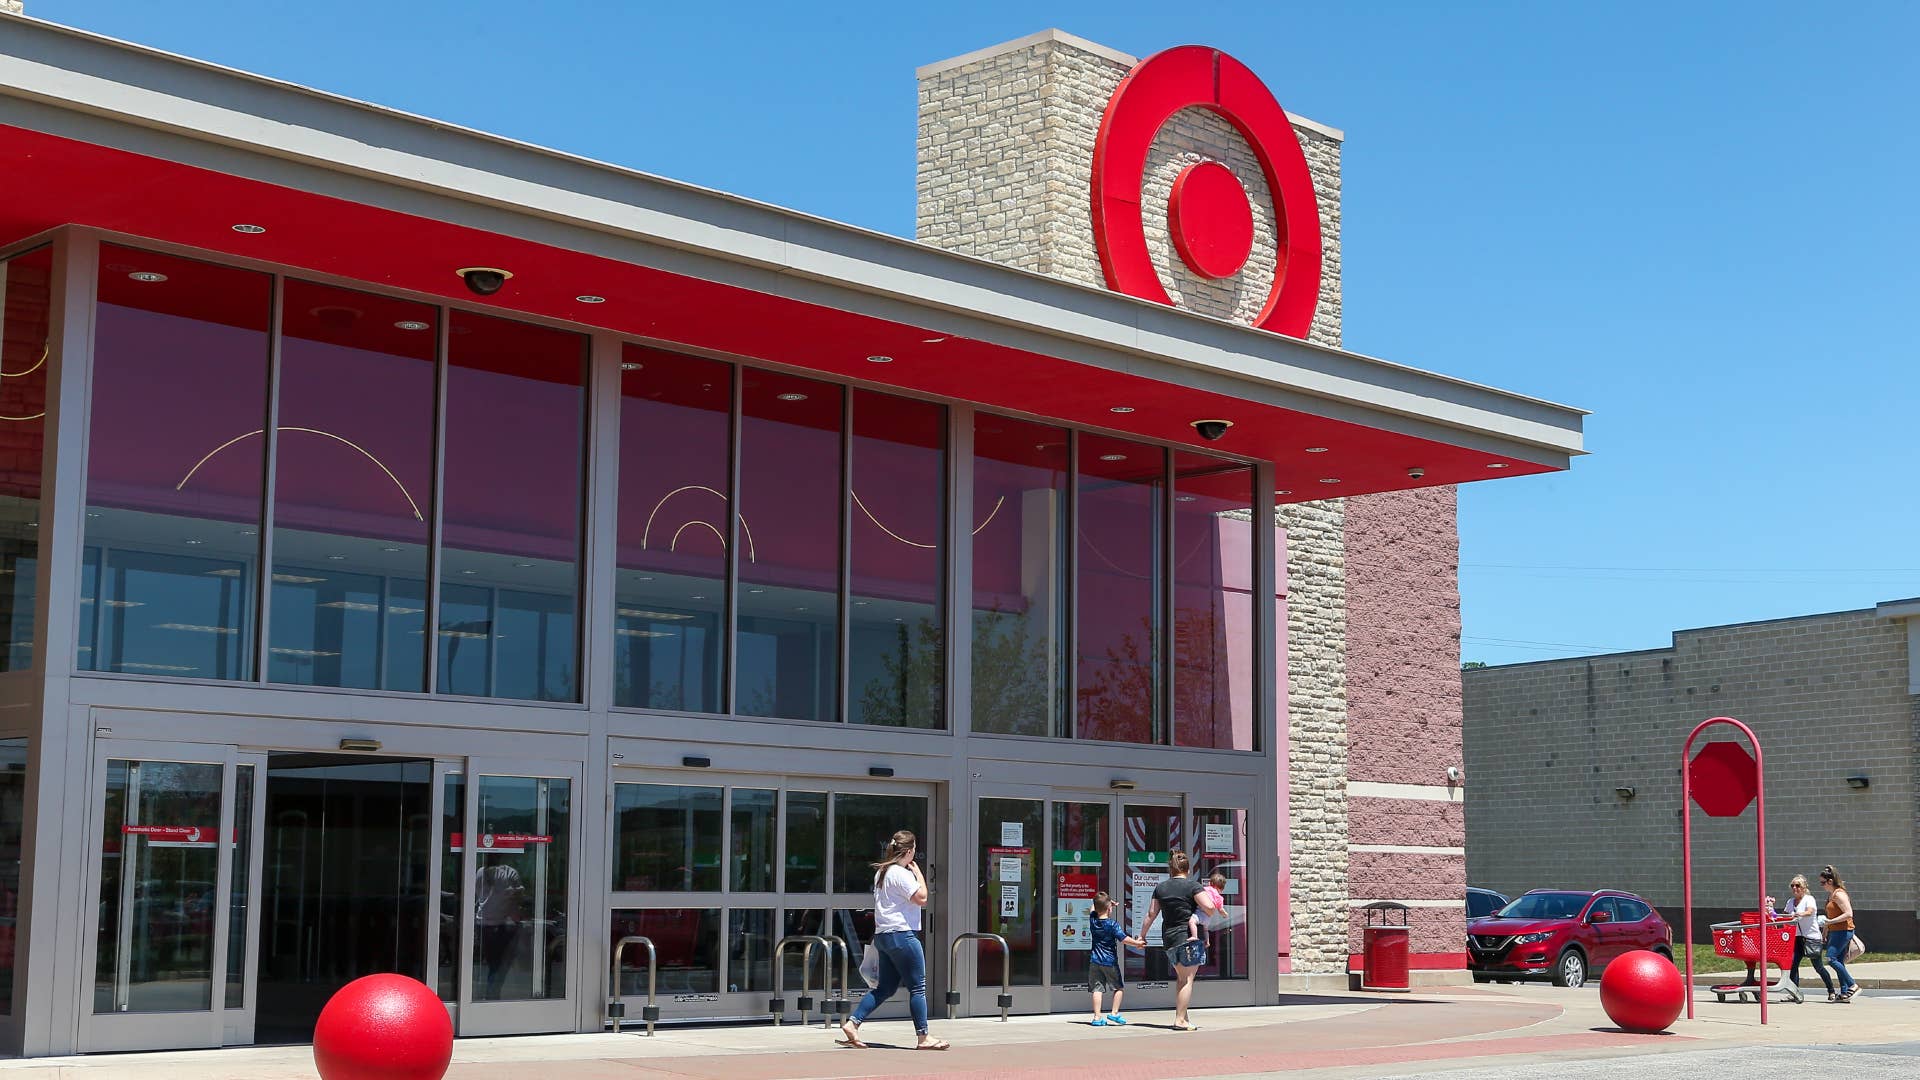 Shoppers are seen walking near a Target store.